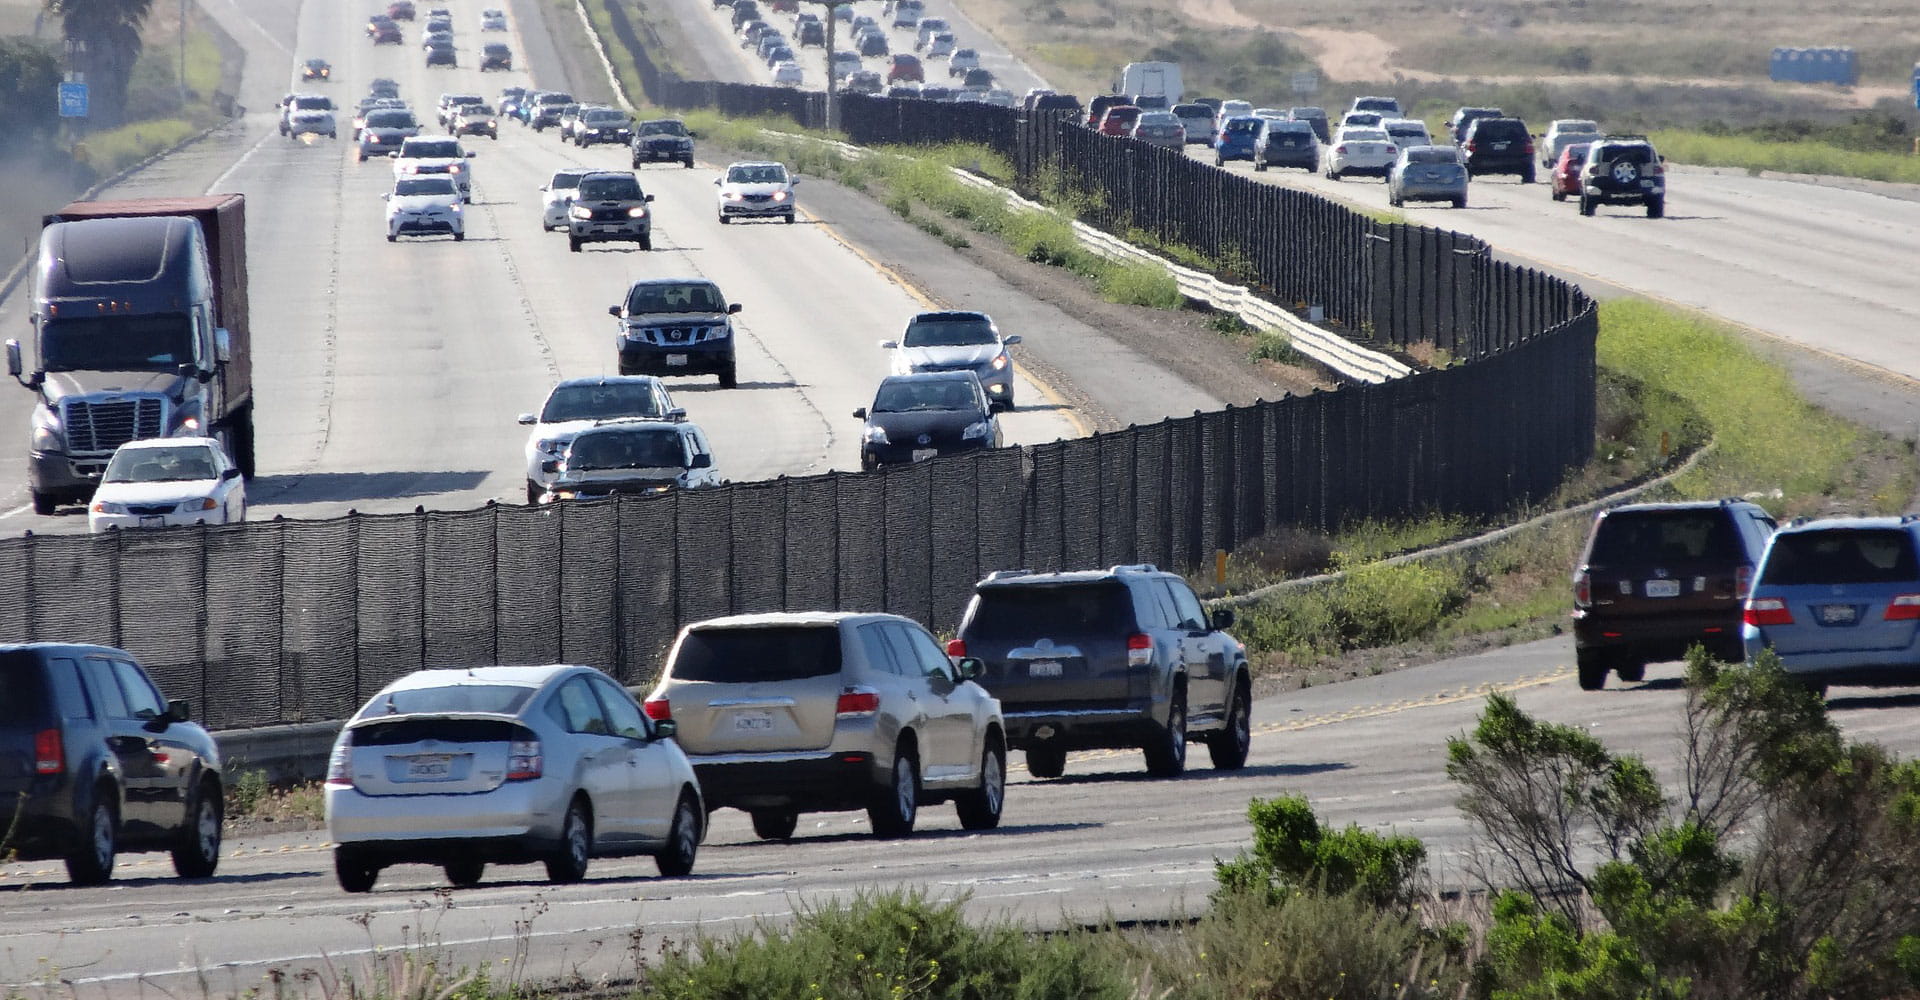 Afraid to Drive on the Highway? You’re Not Alone